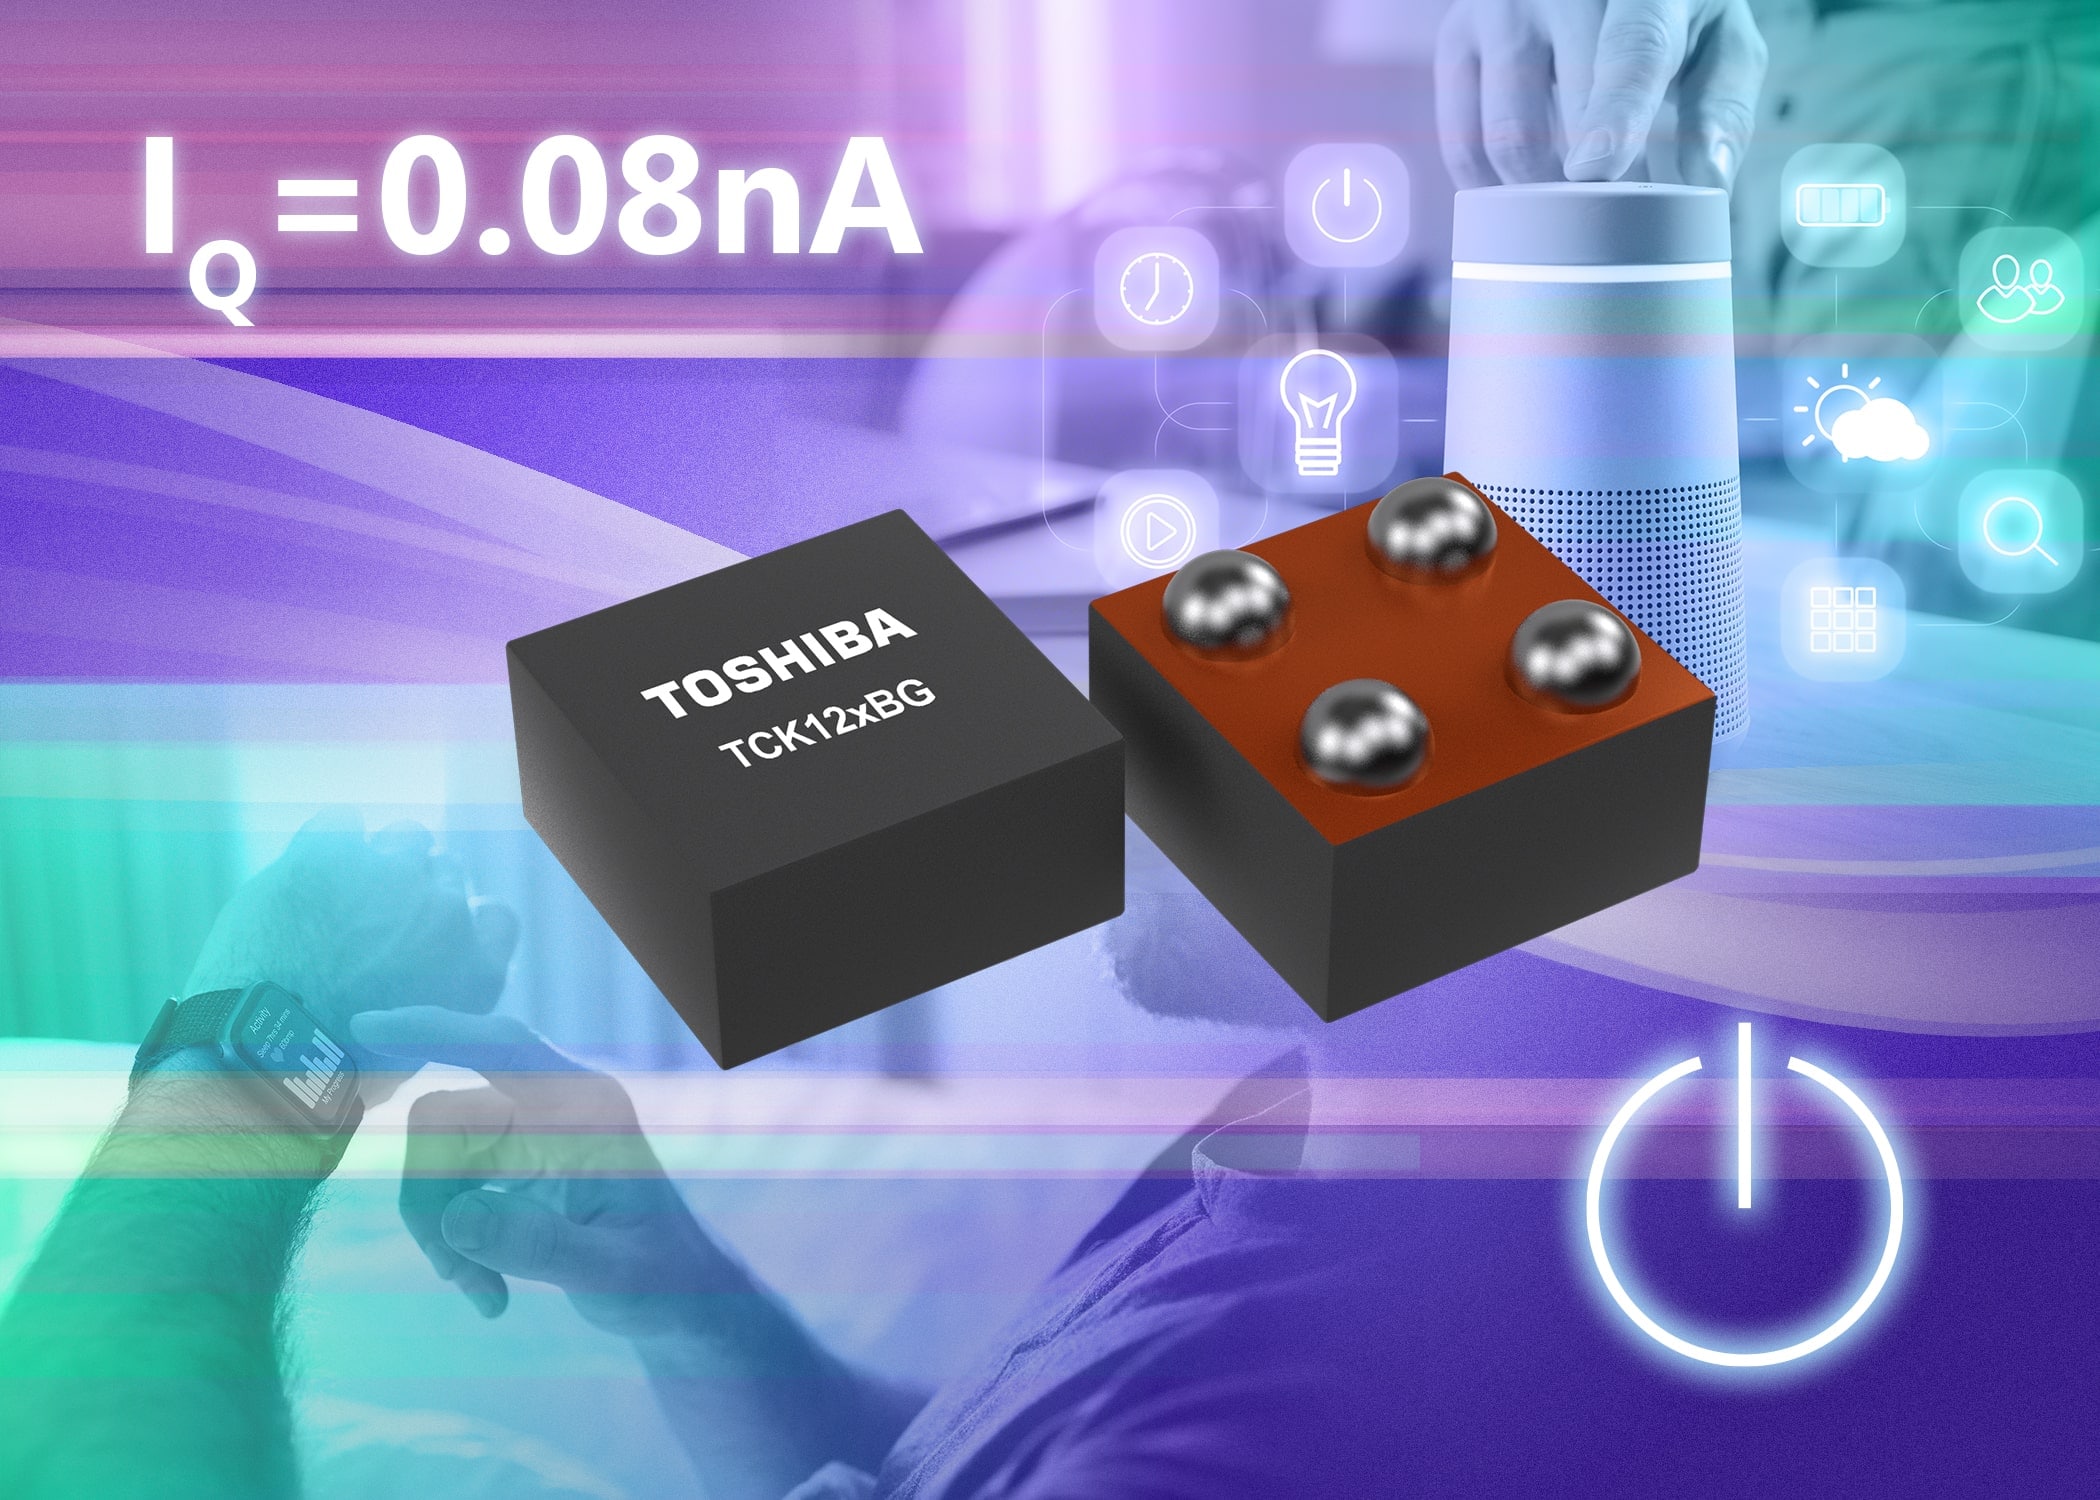 Toshiba announces load switches with ultra-low quiescent current consumption of 0.08nA